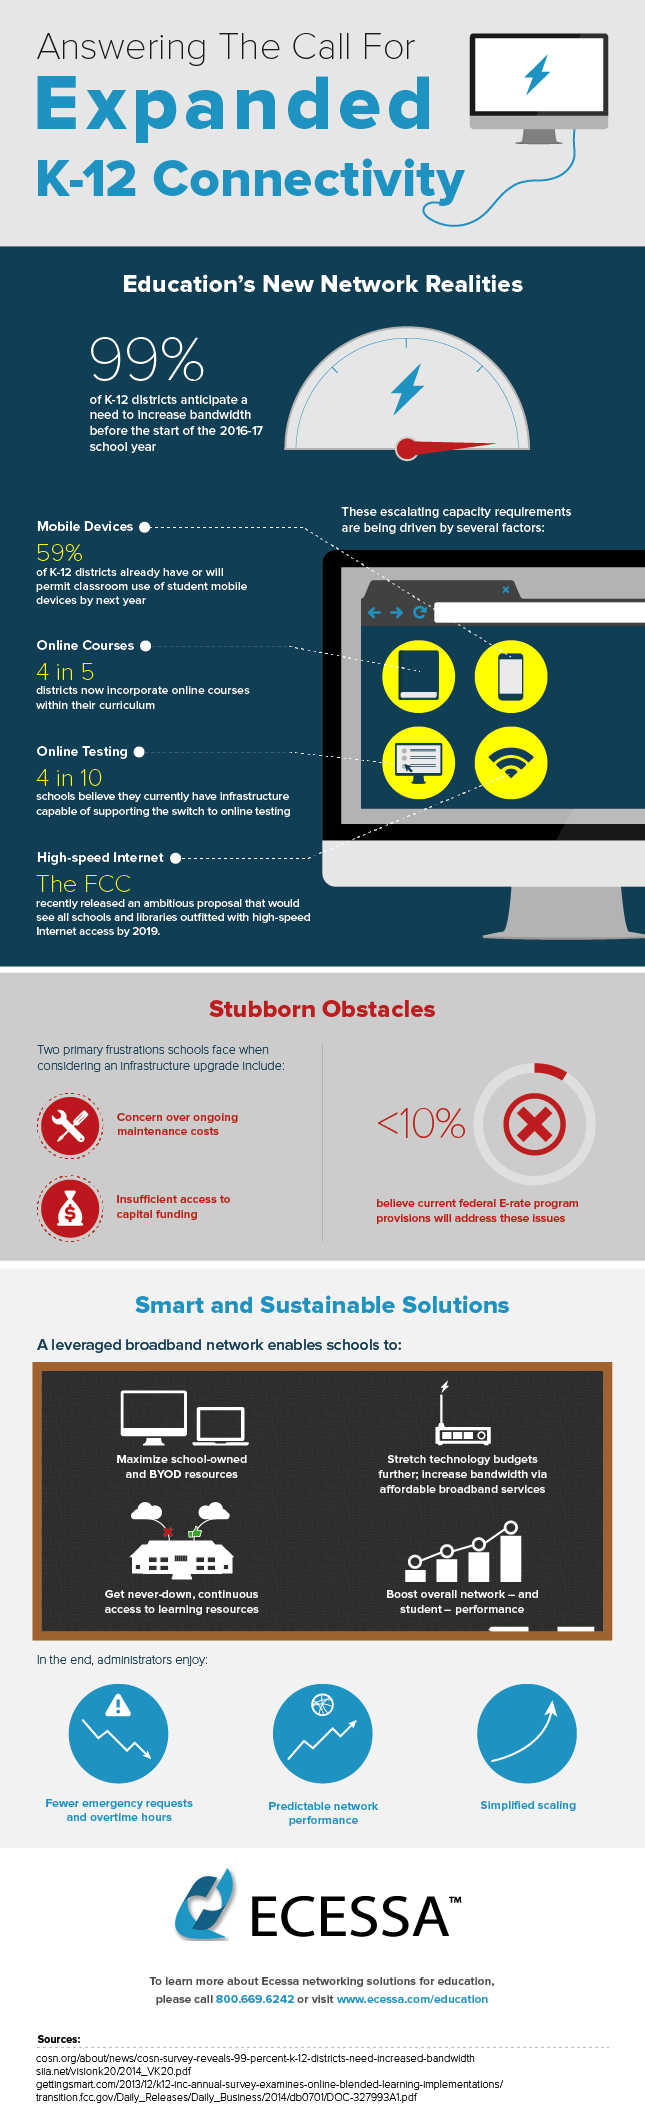 Answering the call for expanded K-12 connectivity - an infographic